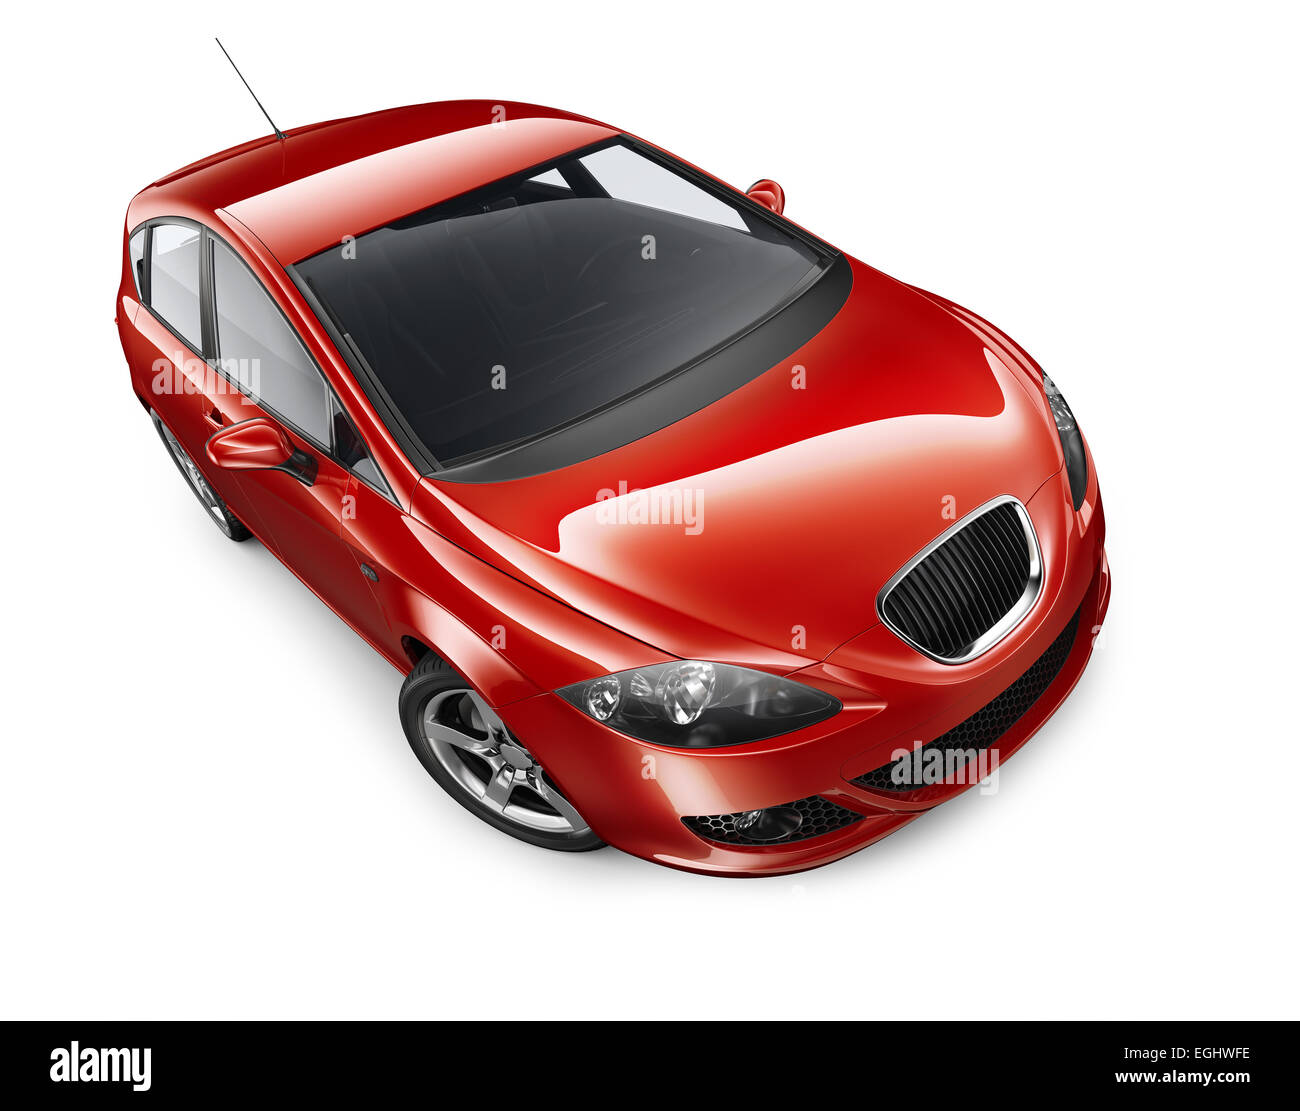 Isolated red car Stock Photo